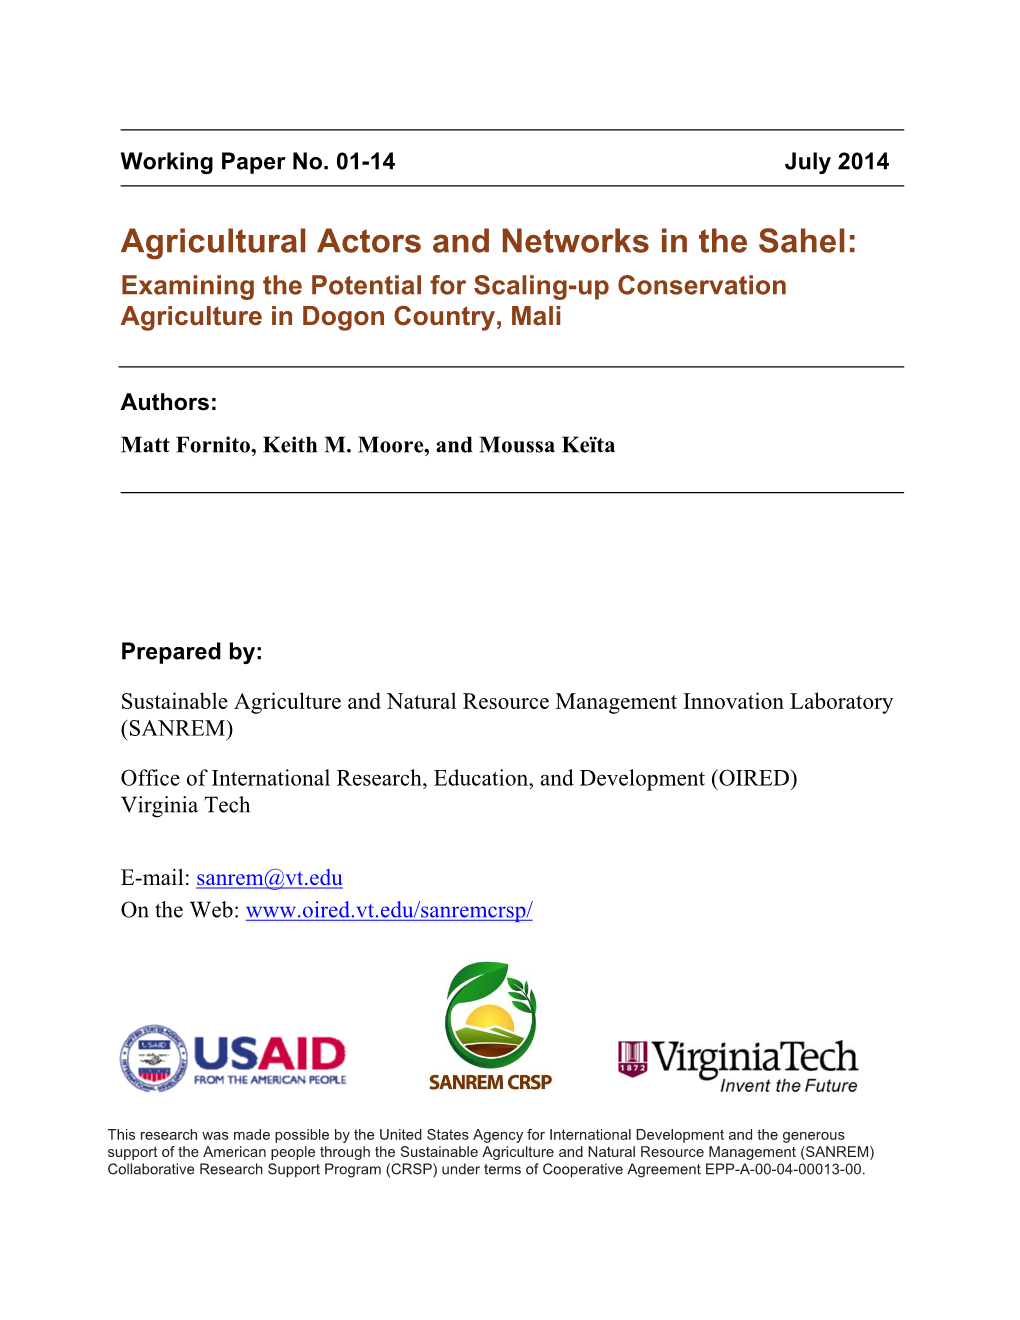 Agricultural Actors and Networks in the Sahel: Examining the Potential for Scaling-Up Conservation Agriculture in Dogon Country, Mali